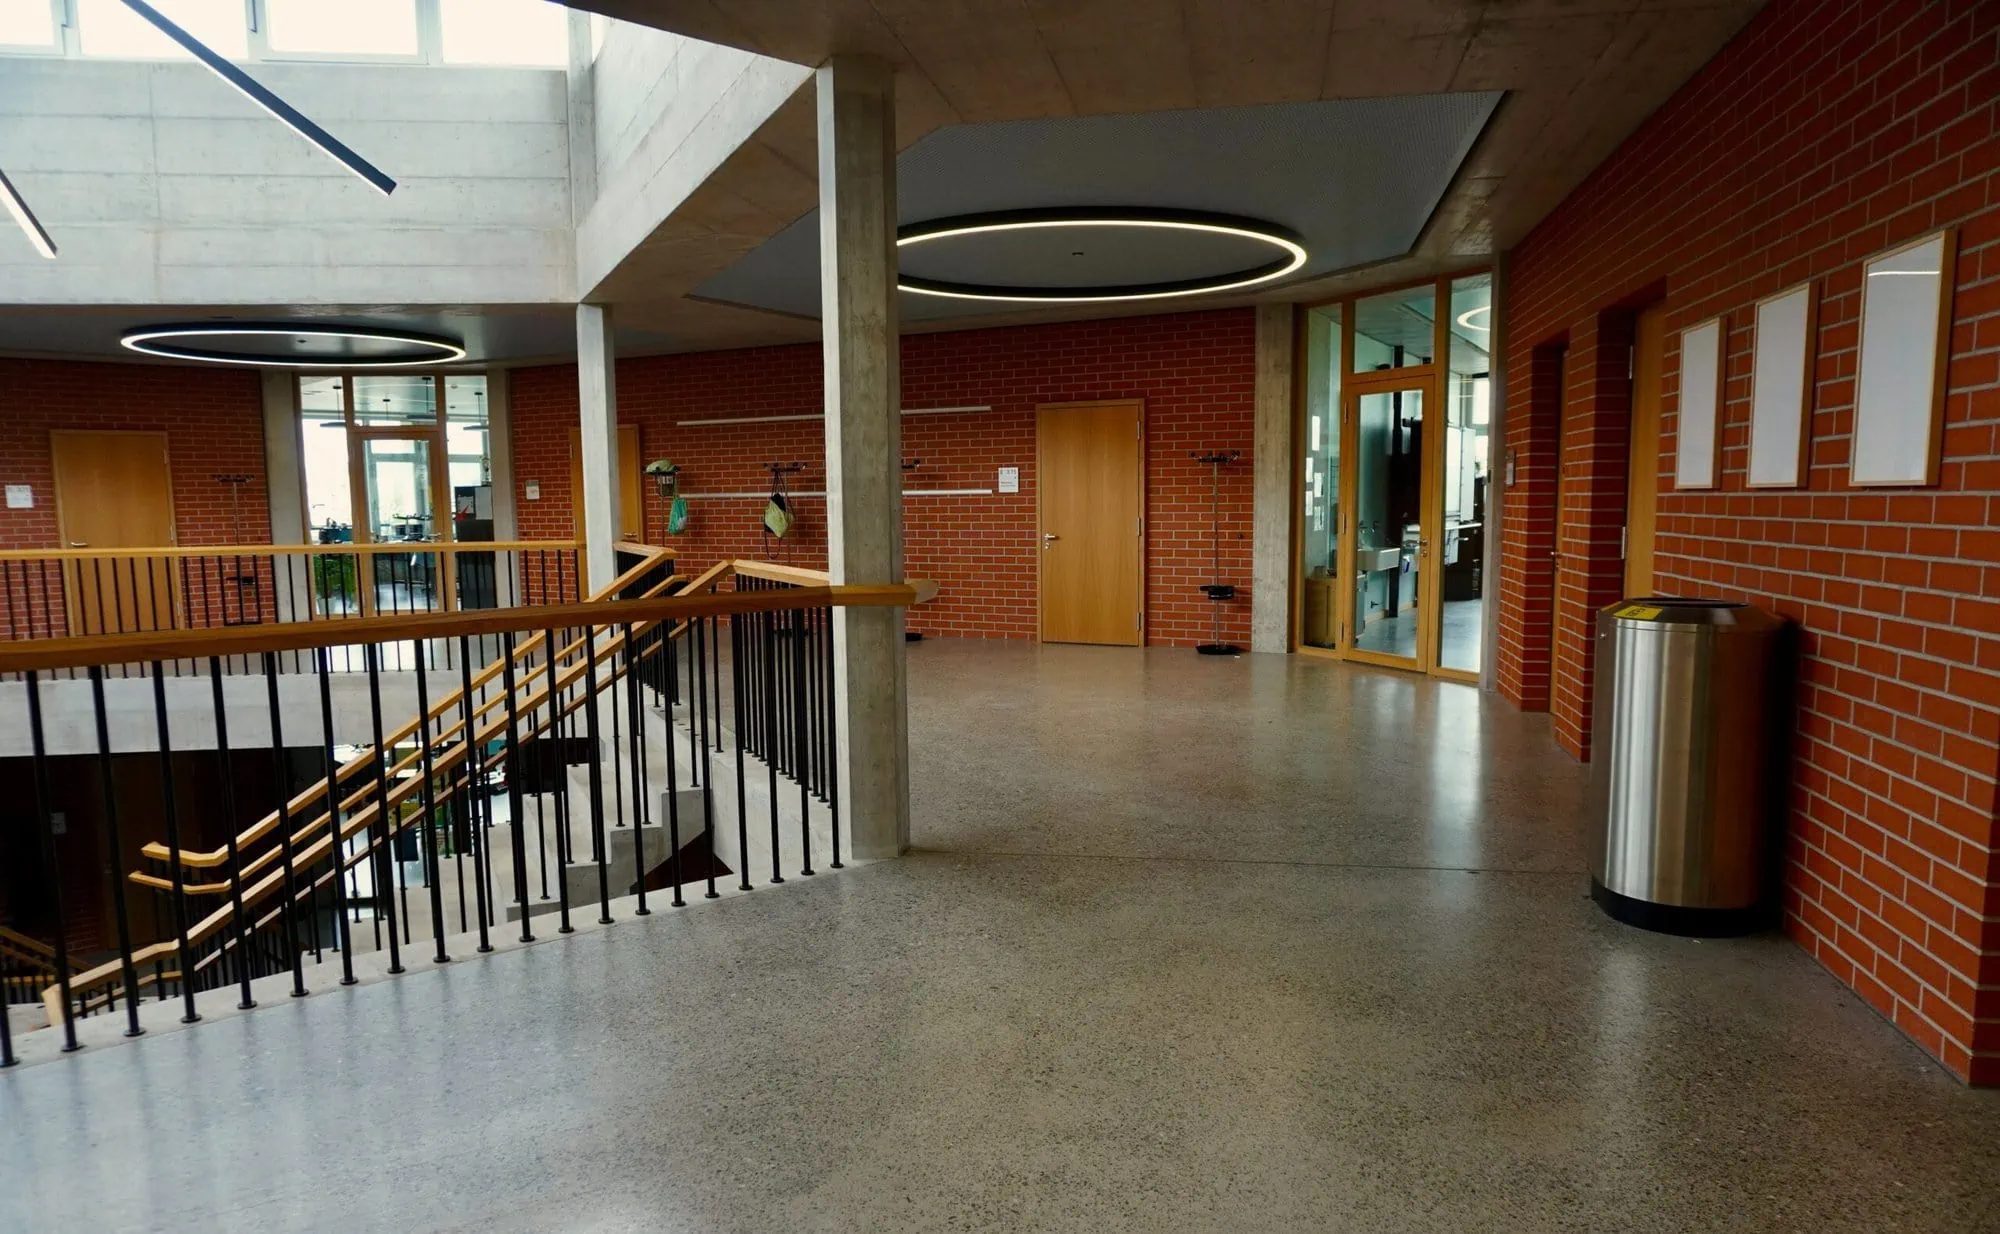 School hallway, nearby stairs and open classroom door, is protected by security cameras with best video quality